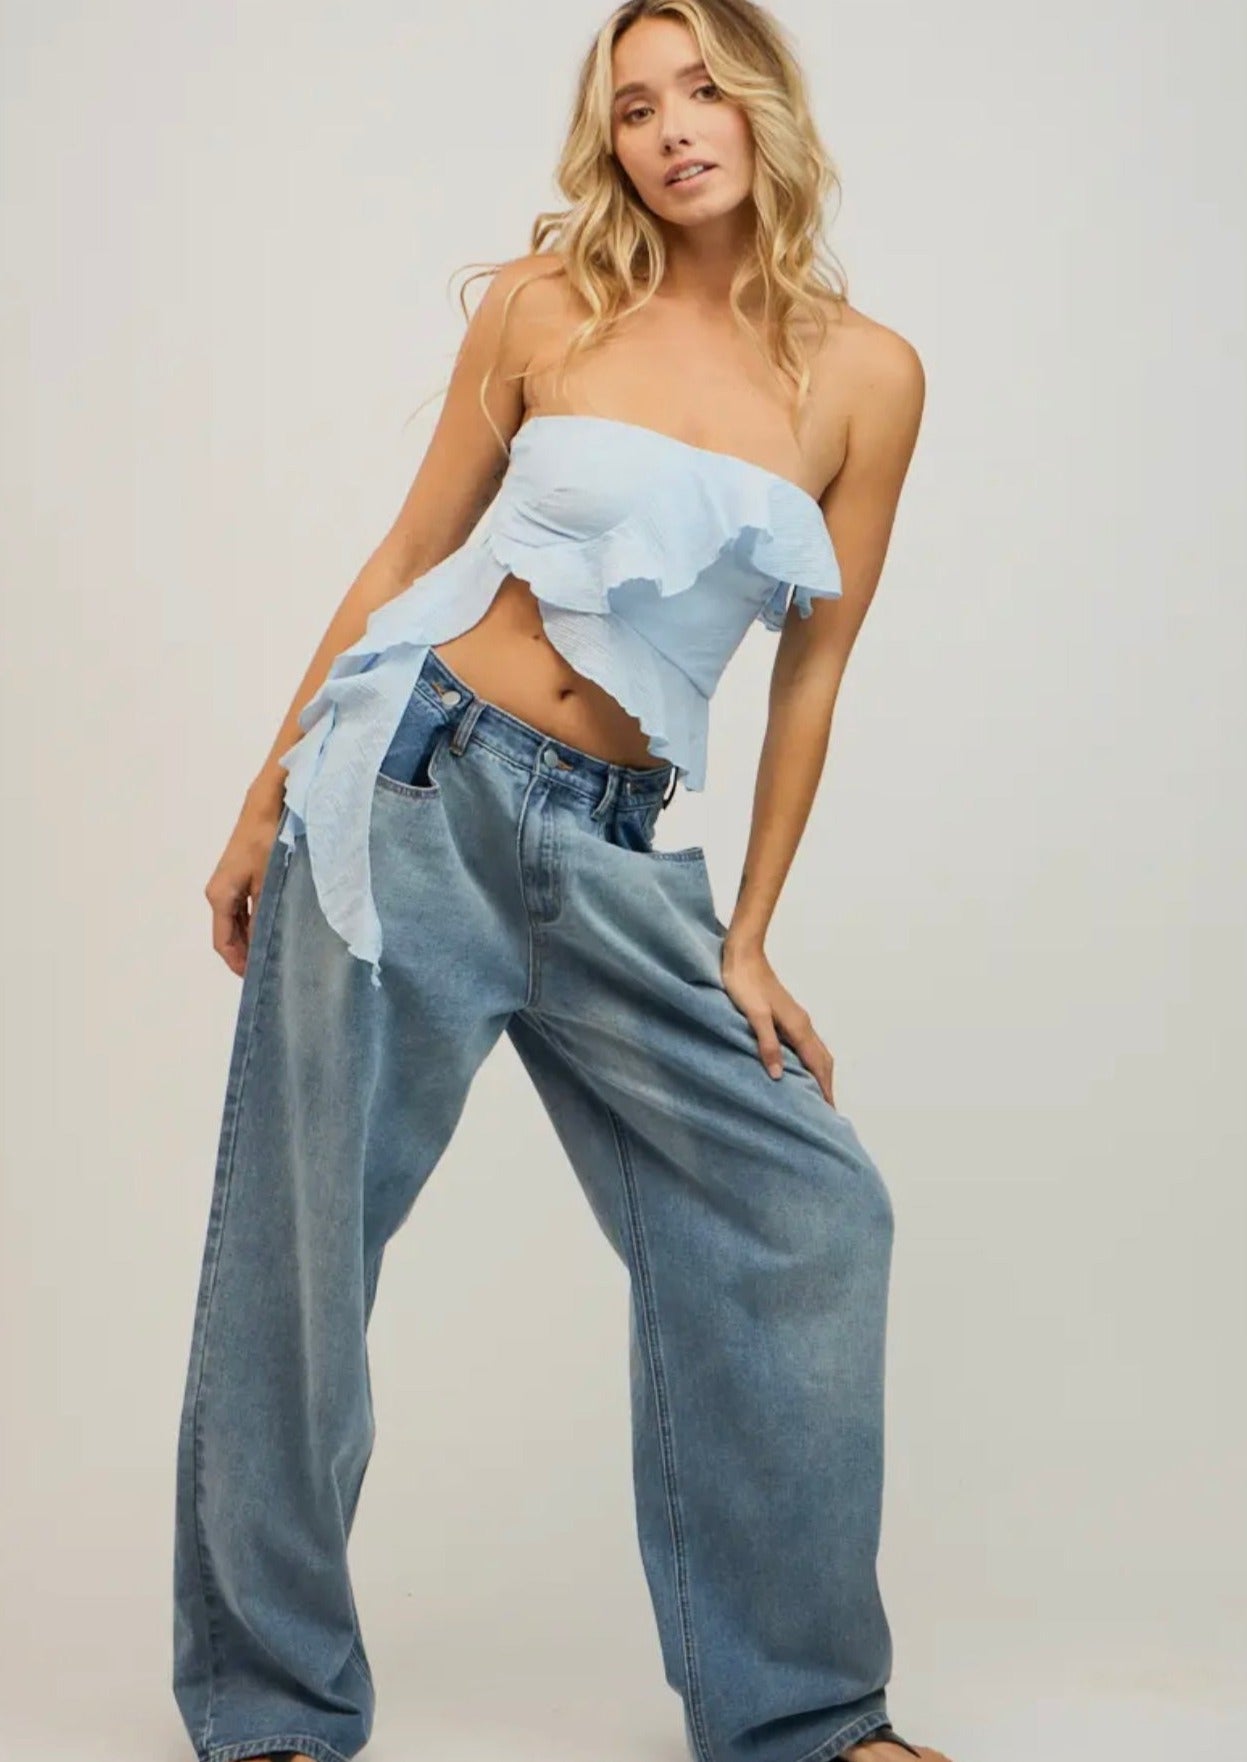 Tiered Ruffle Strapless Crop Top